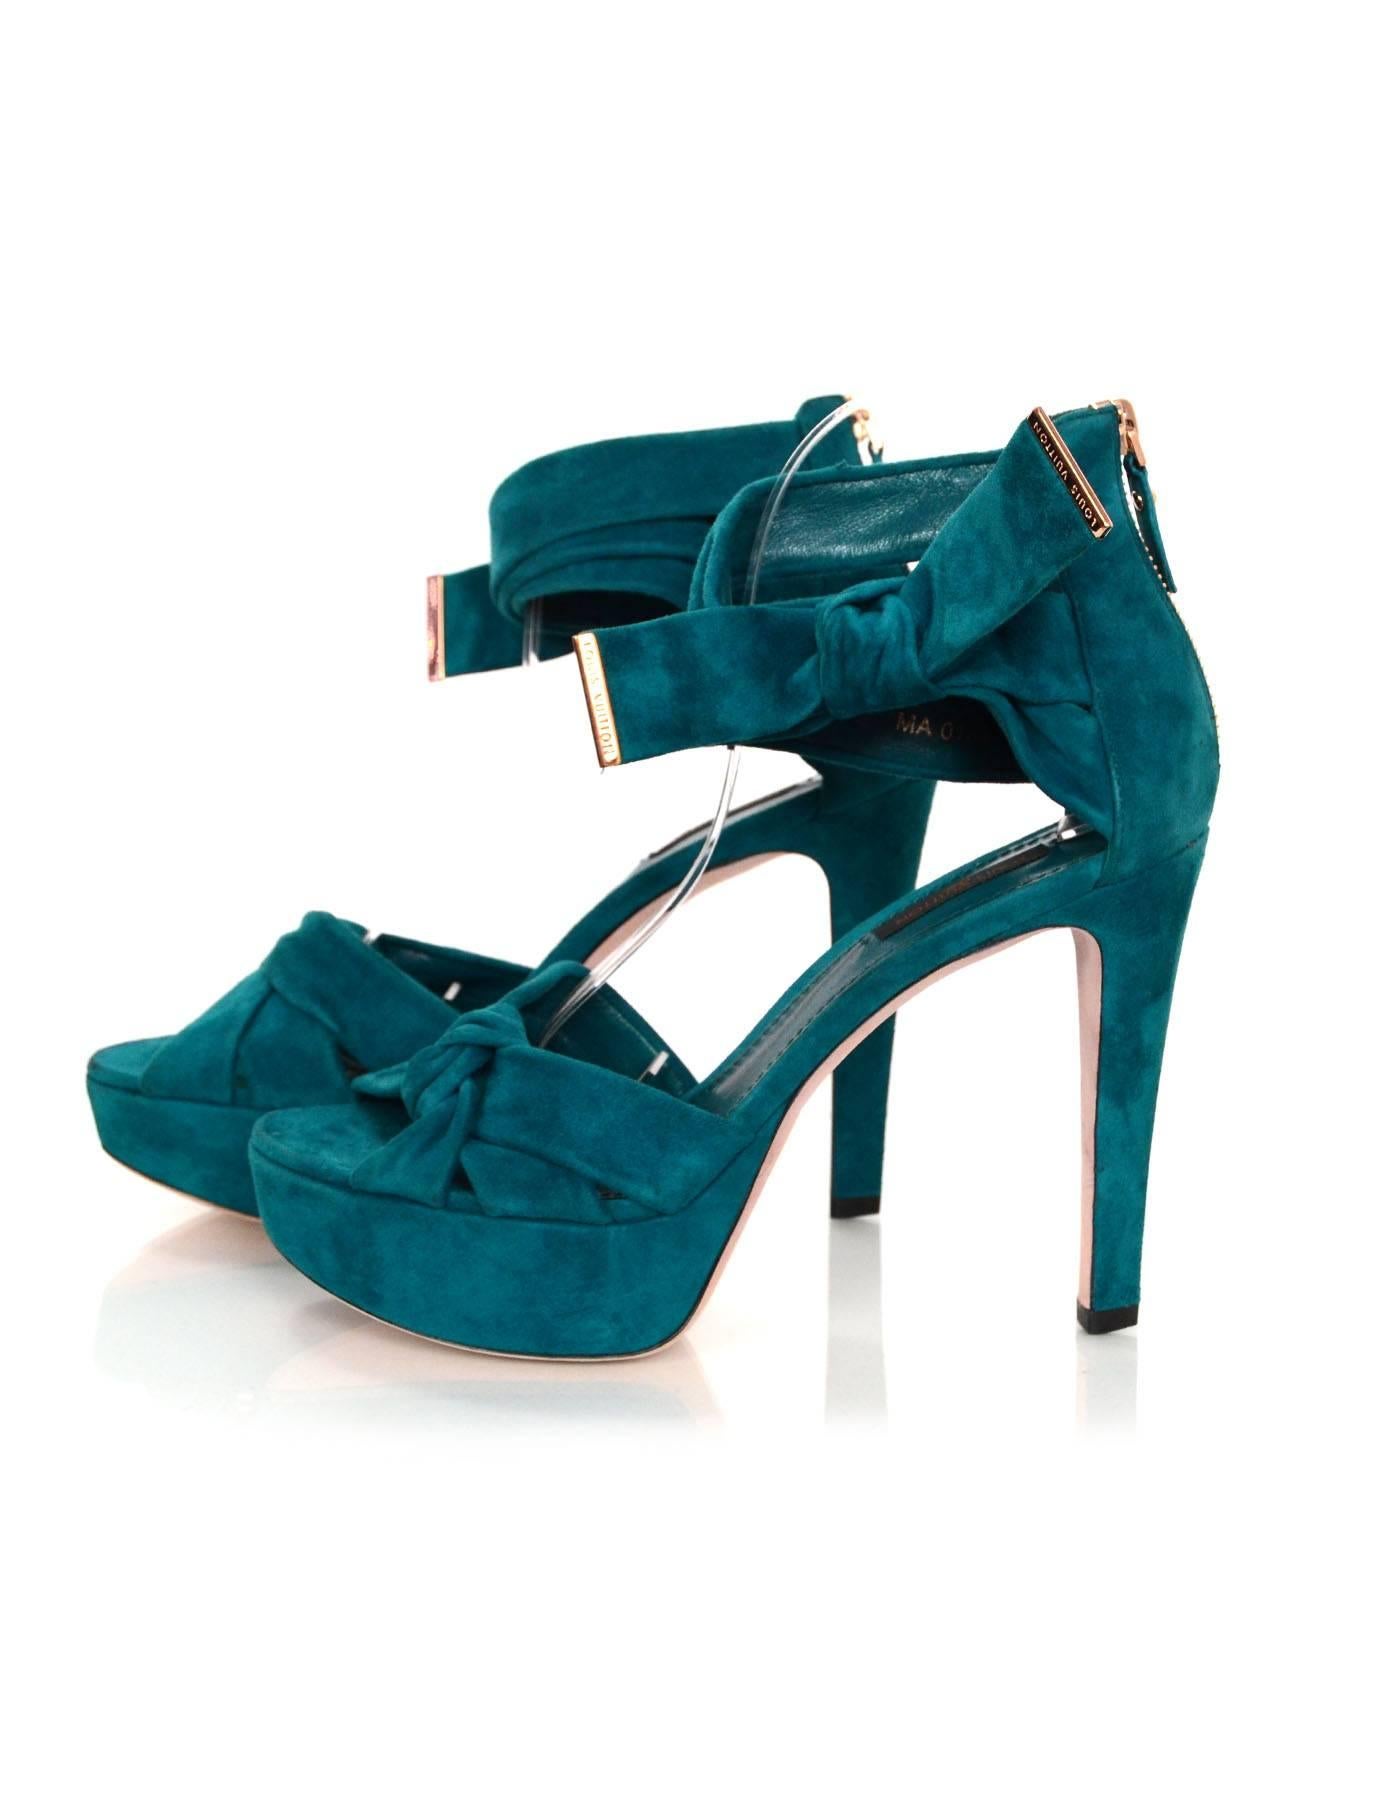 Louis Vuitton Teal Suede Sandals Sz 38
Features bow detail at ankles

Made In: Italy
Color: Teal
Materials: Suede
Closure/Opening: Zipper closure at back of ankle
Sole Stamp: LV 38 Made in Italy
Overall Condition: Excellent pre-owned